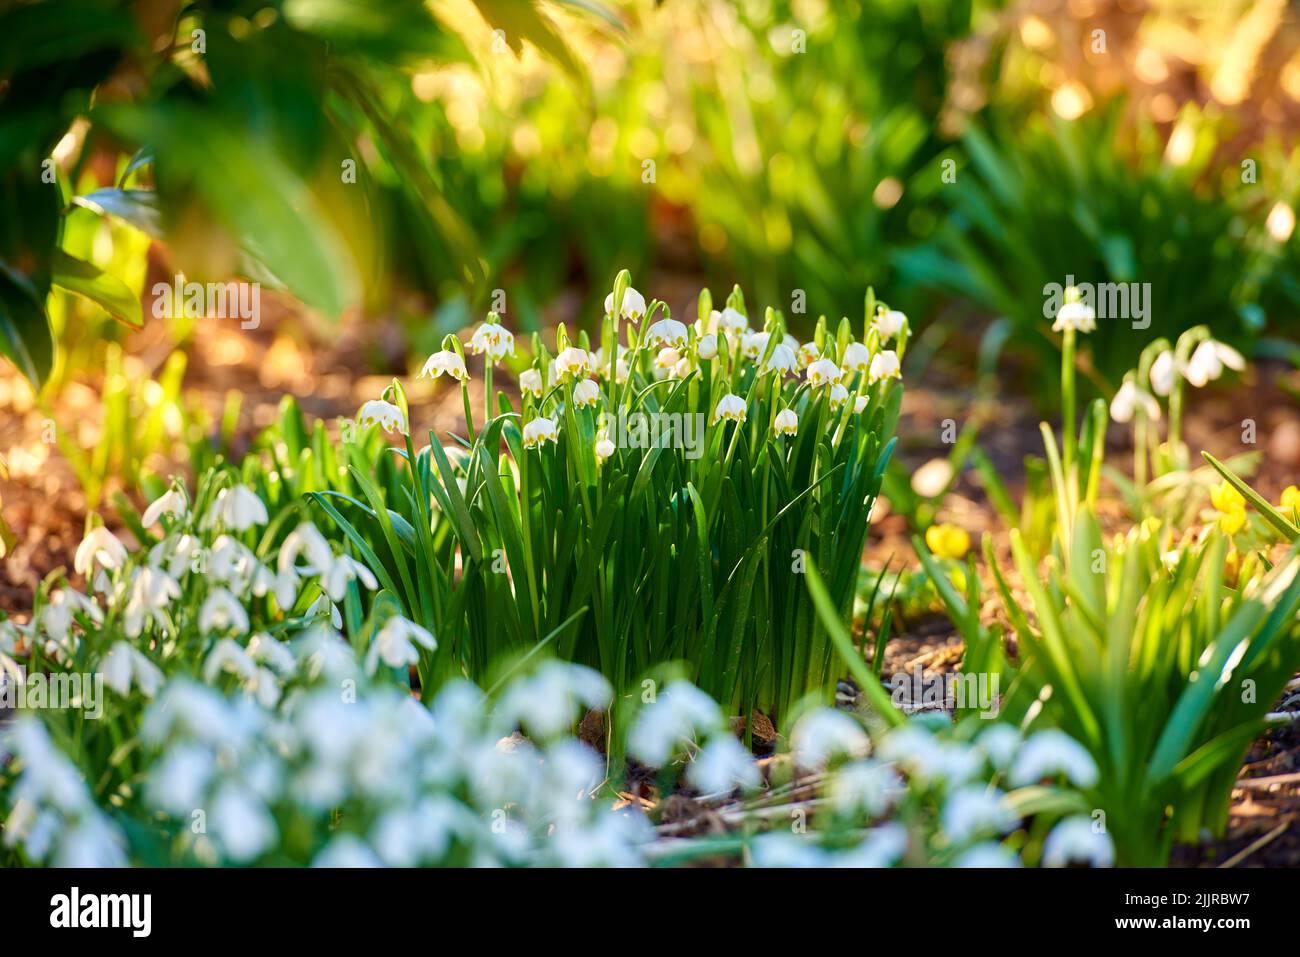 Green and white natural winter flowers growing in a lush home garden or backyard. Closeup, texture and detail of common snowdrop plants flowering in a Stock Photo